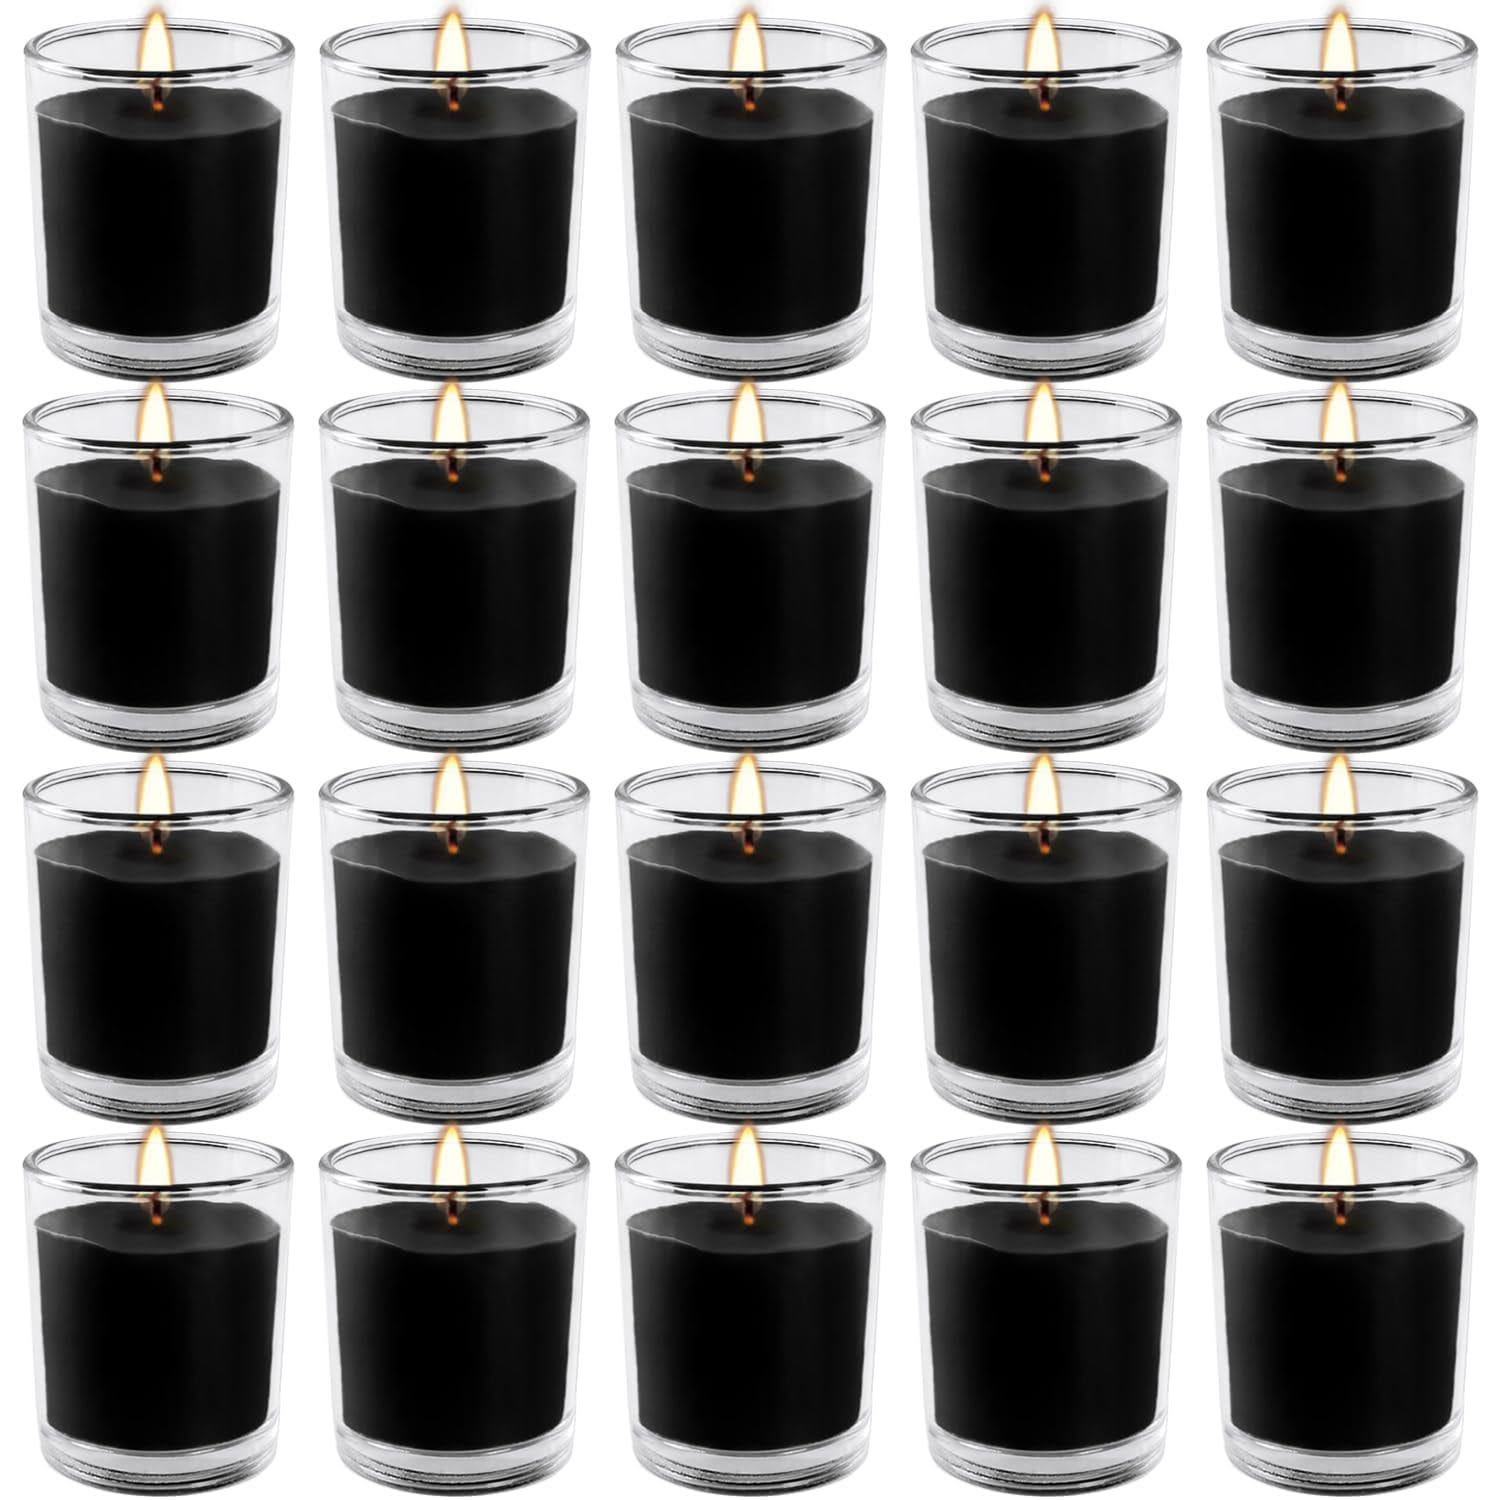 Black Votive Candles for All Occasions | Image